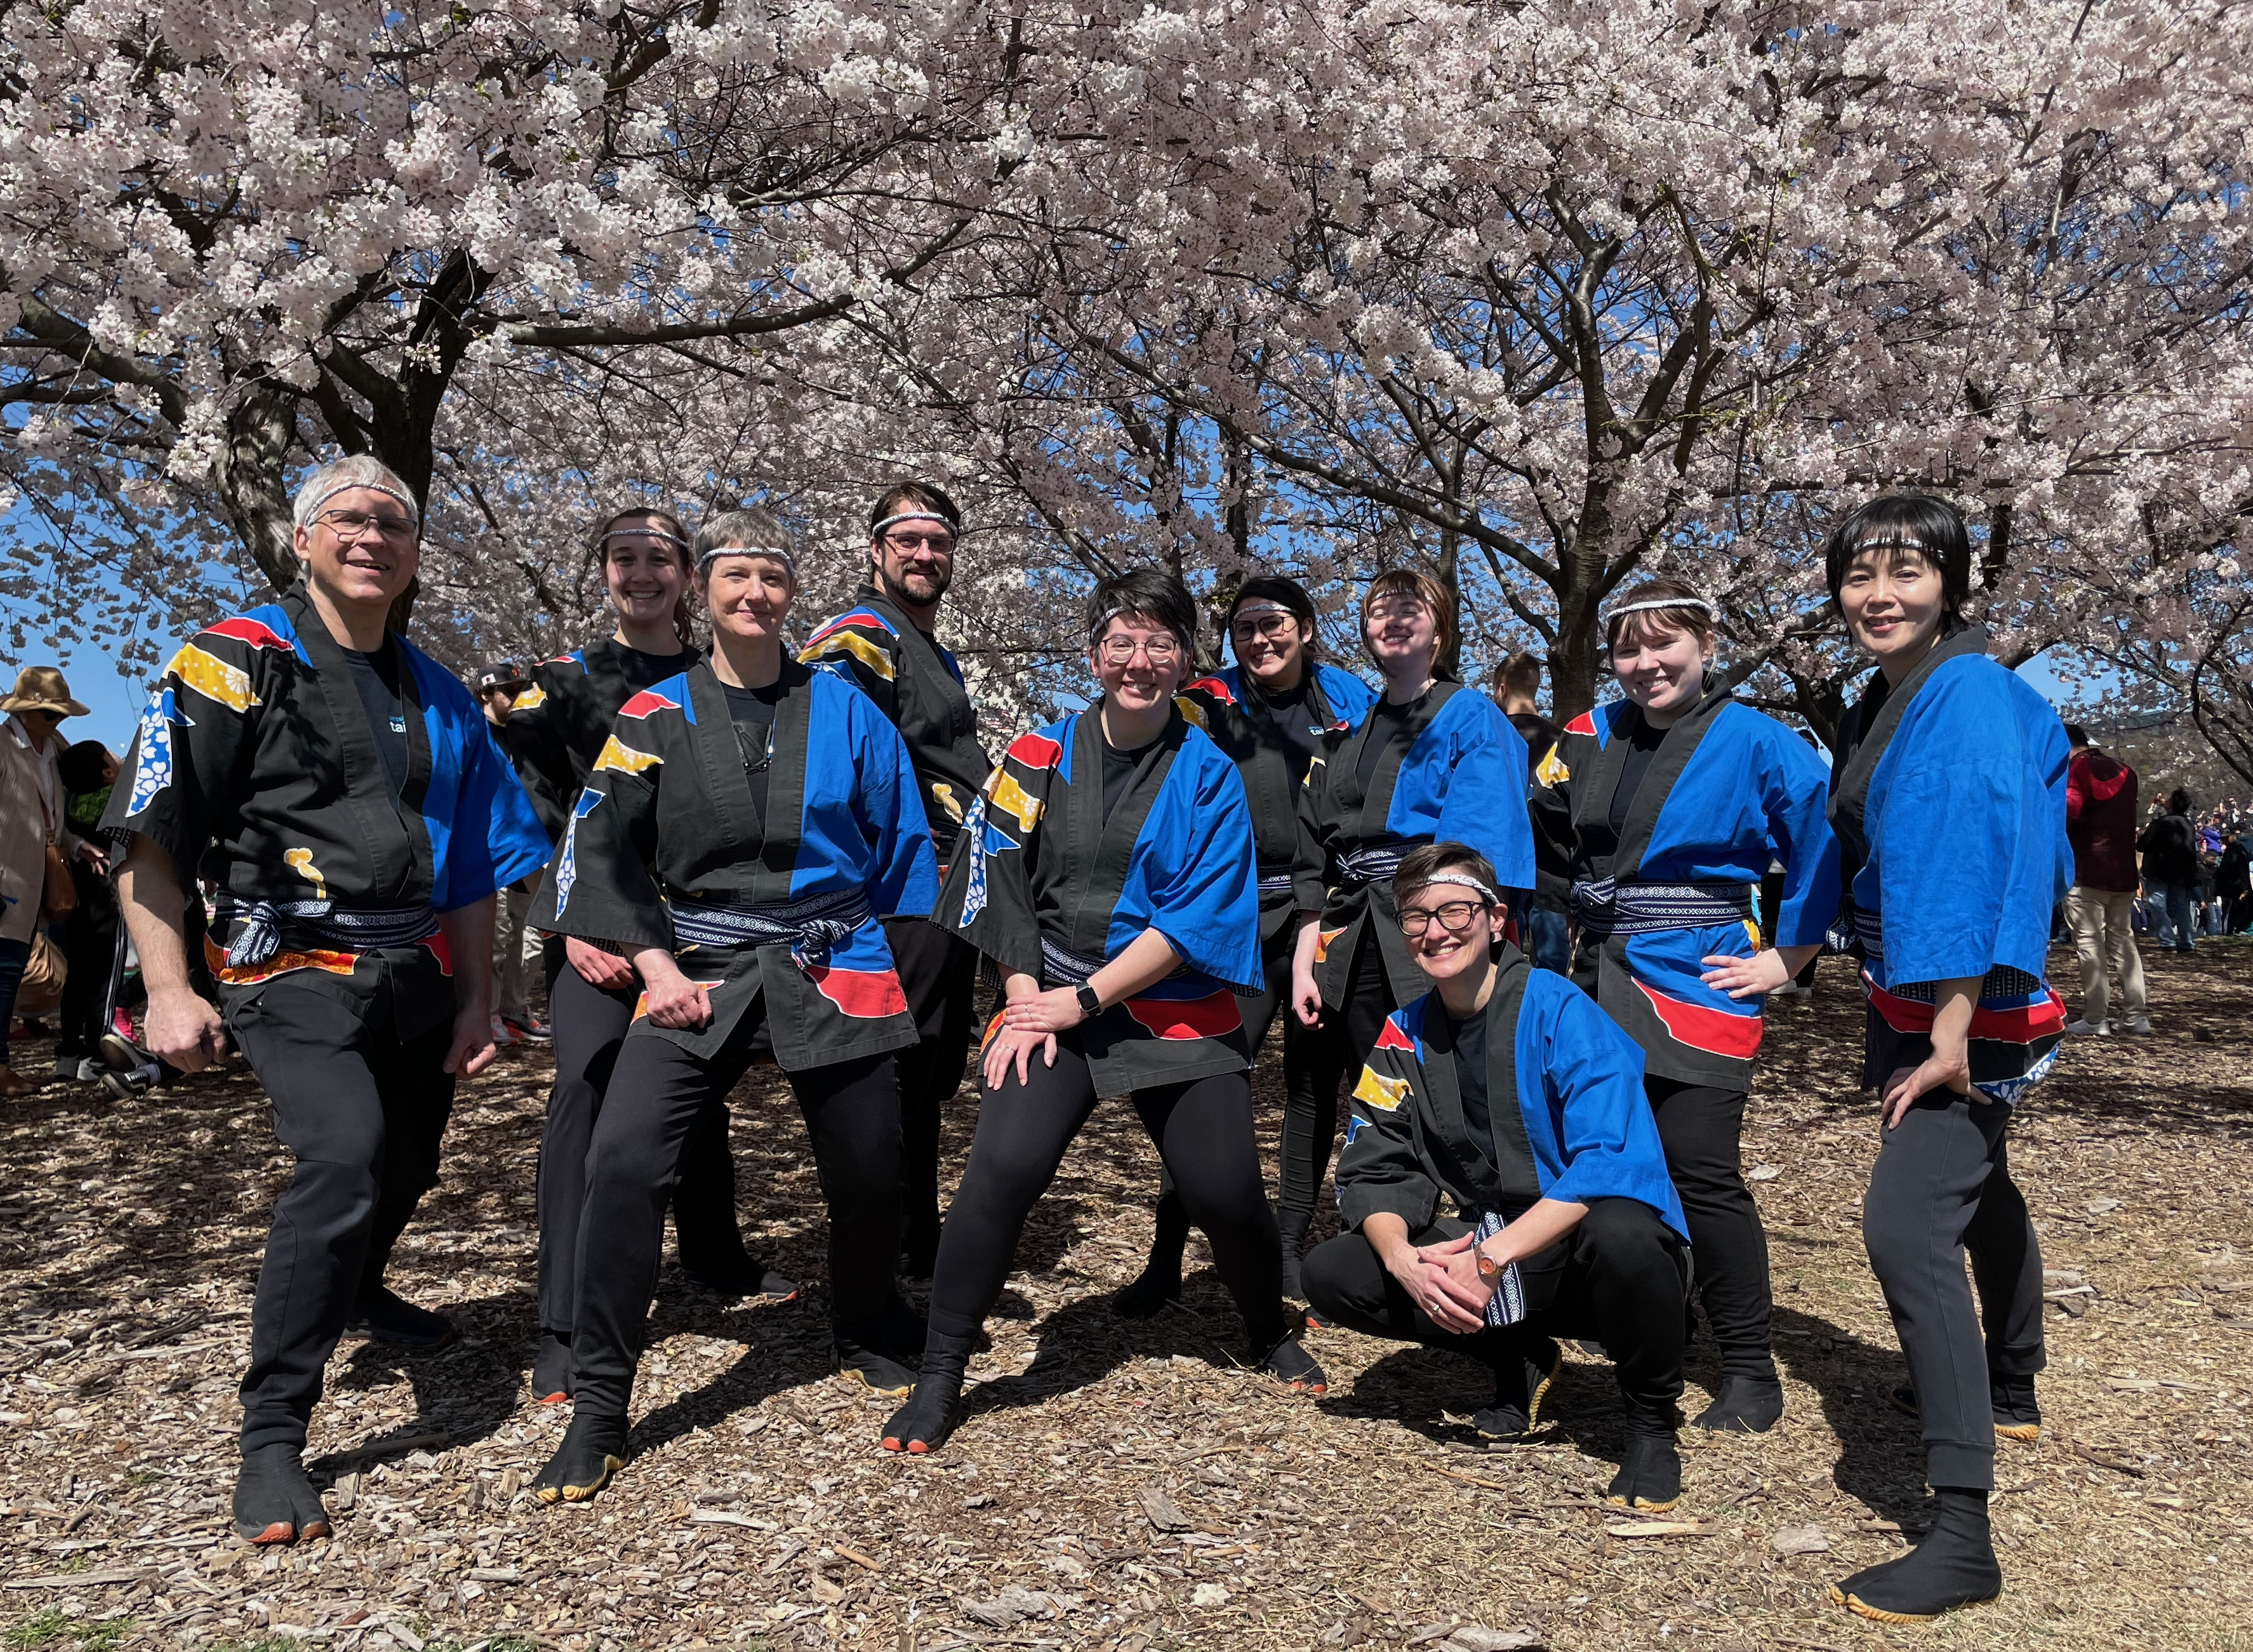 Group photo of Pittsburgh Taiko in blue happi costume posing in front of blooming cherry trees